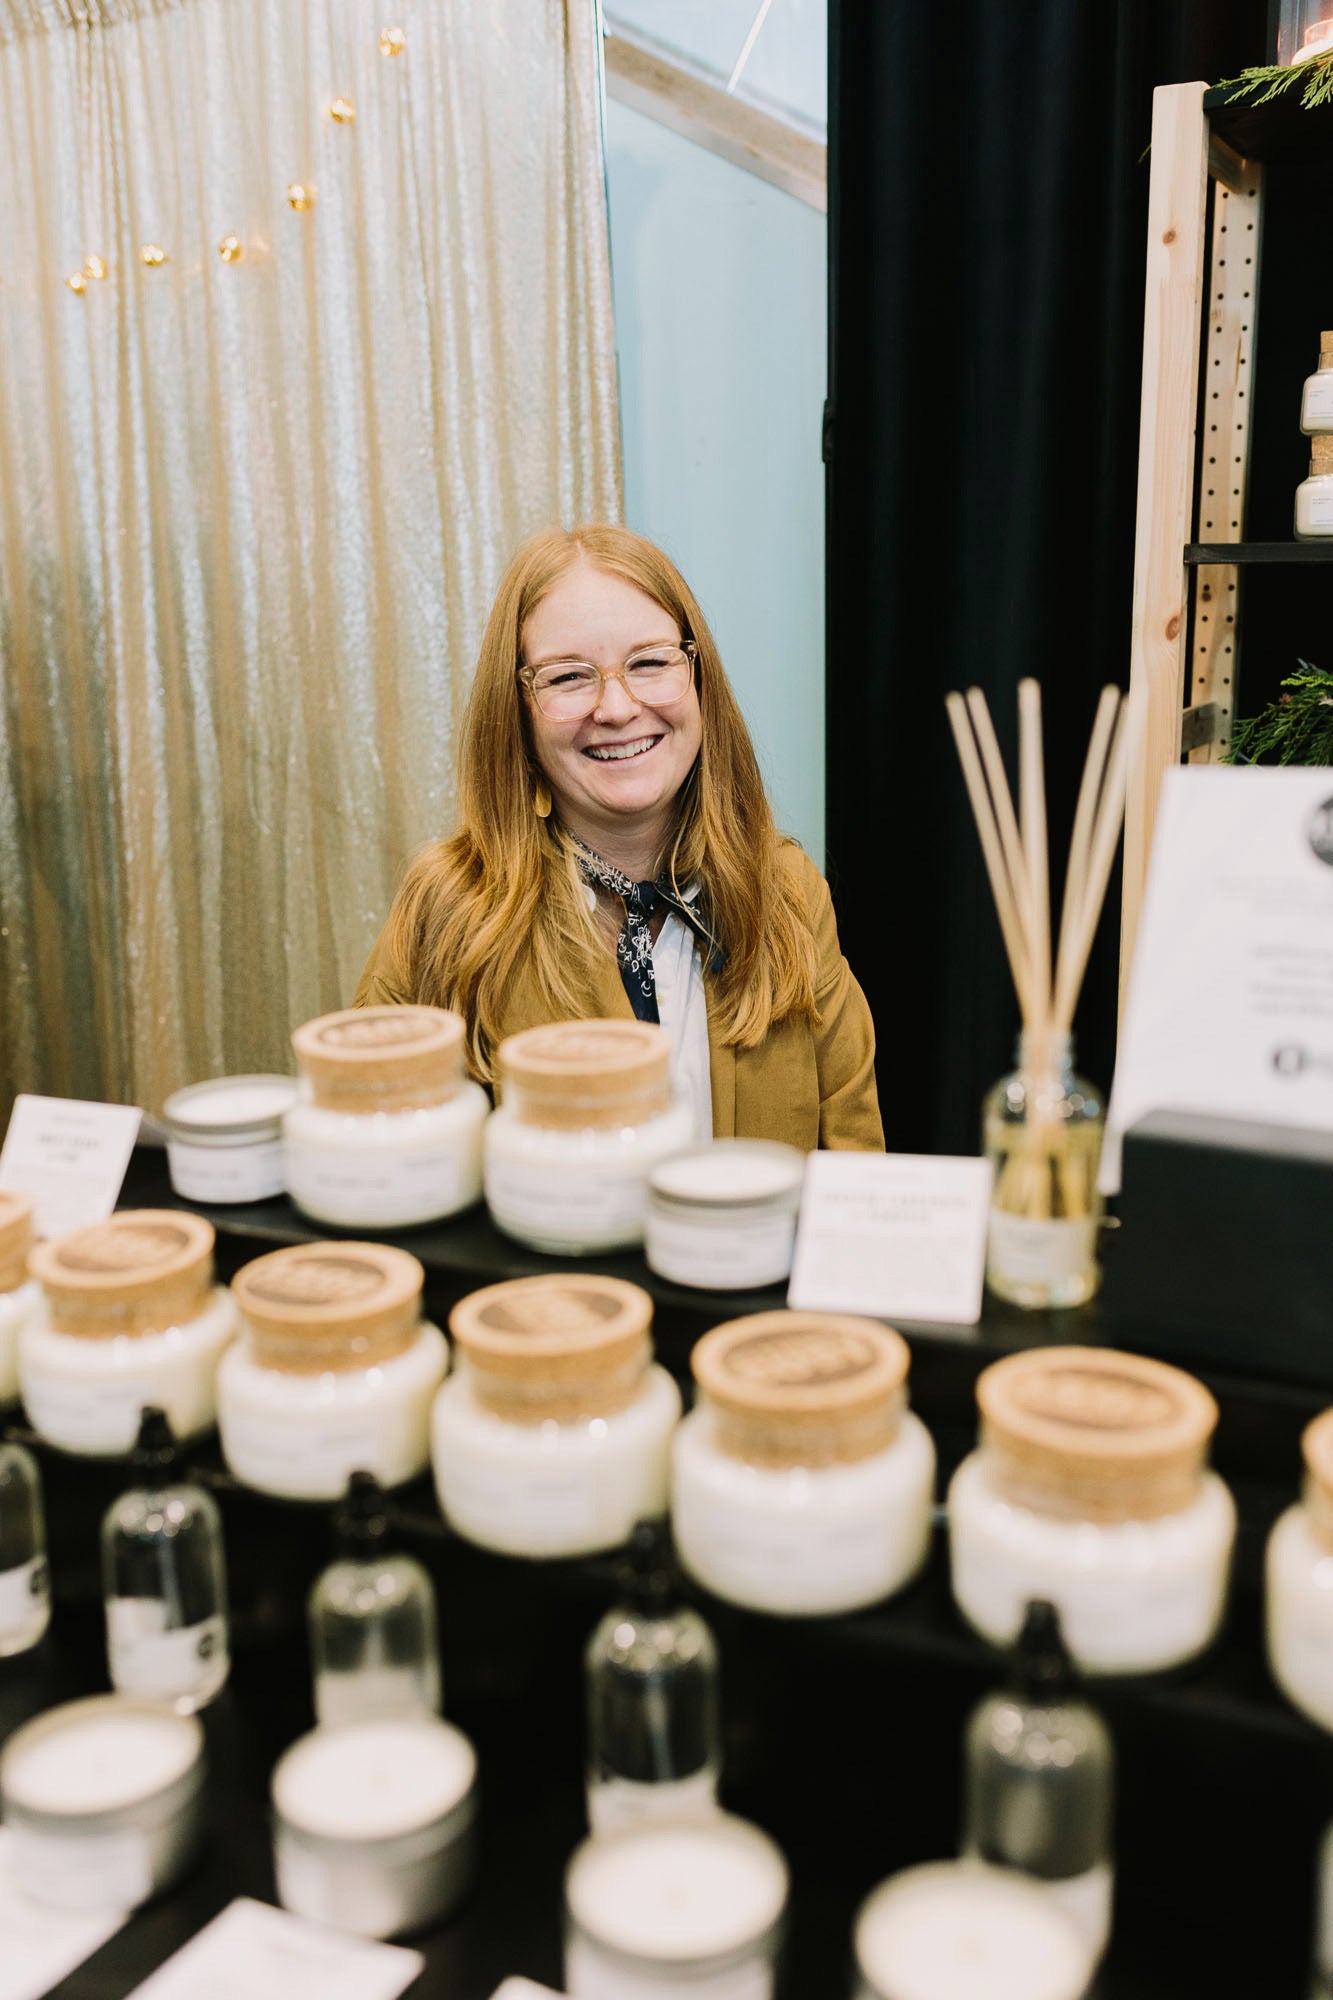 Caroline a fair skined woman with longer red hair and the owner of 1502 Candle Co. smiles behind her candle display.